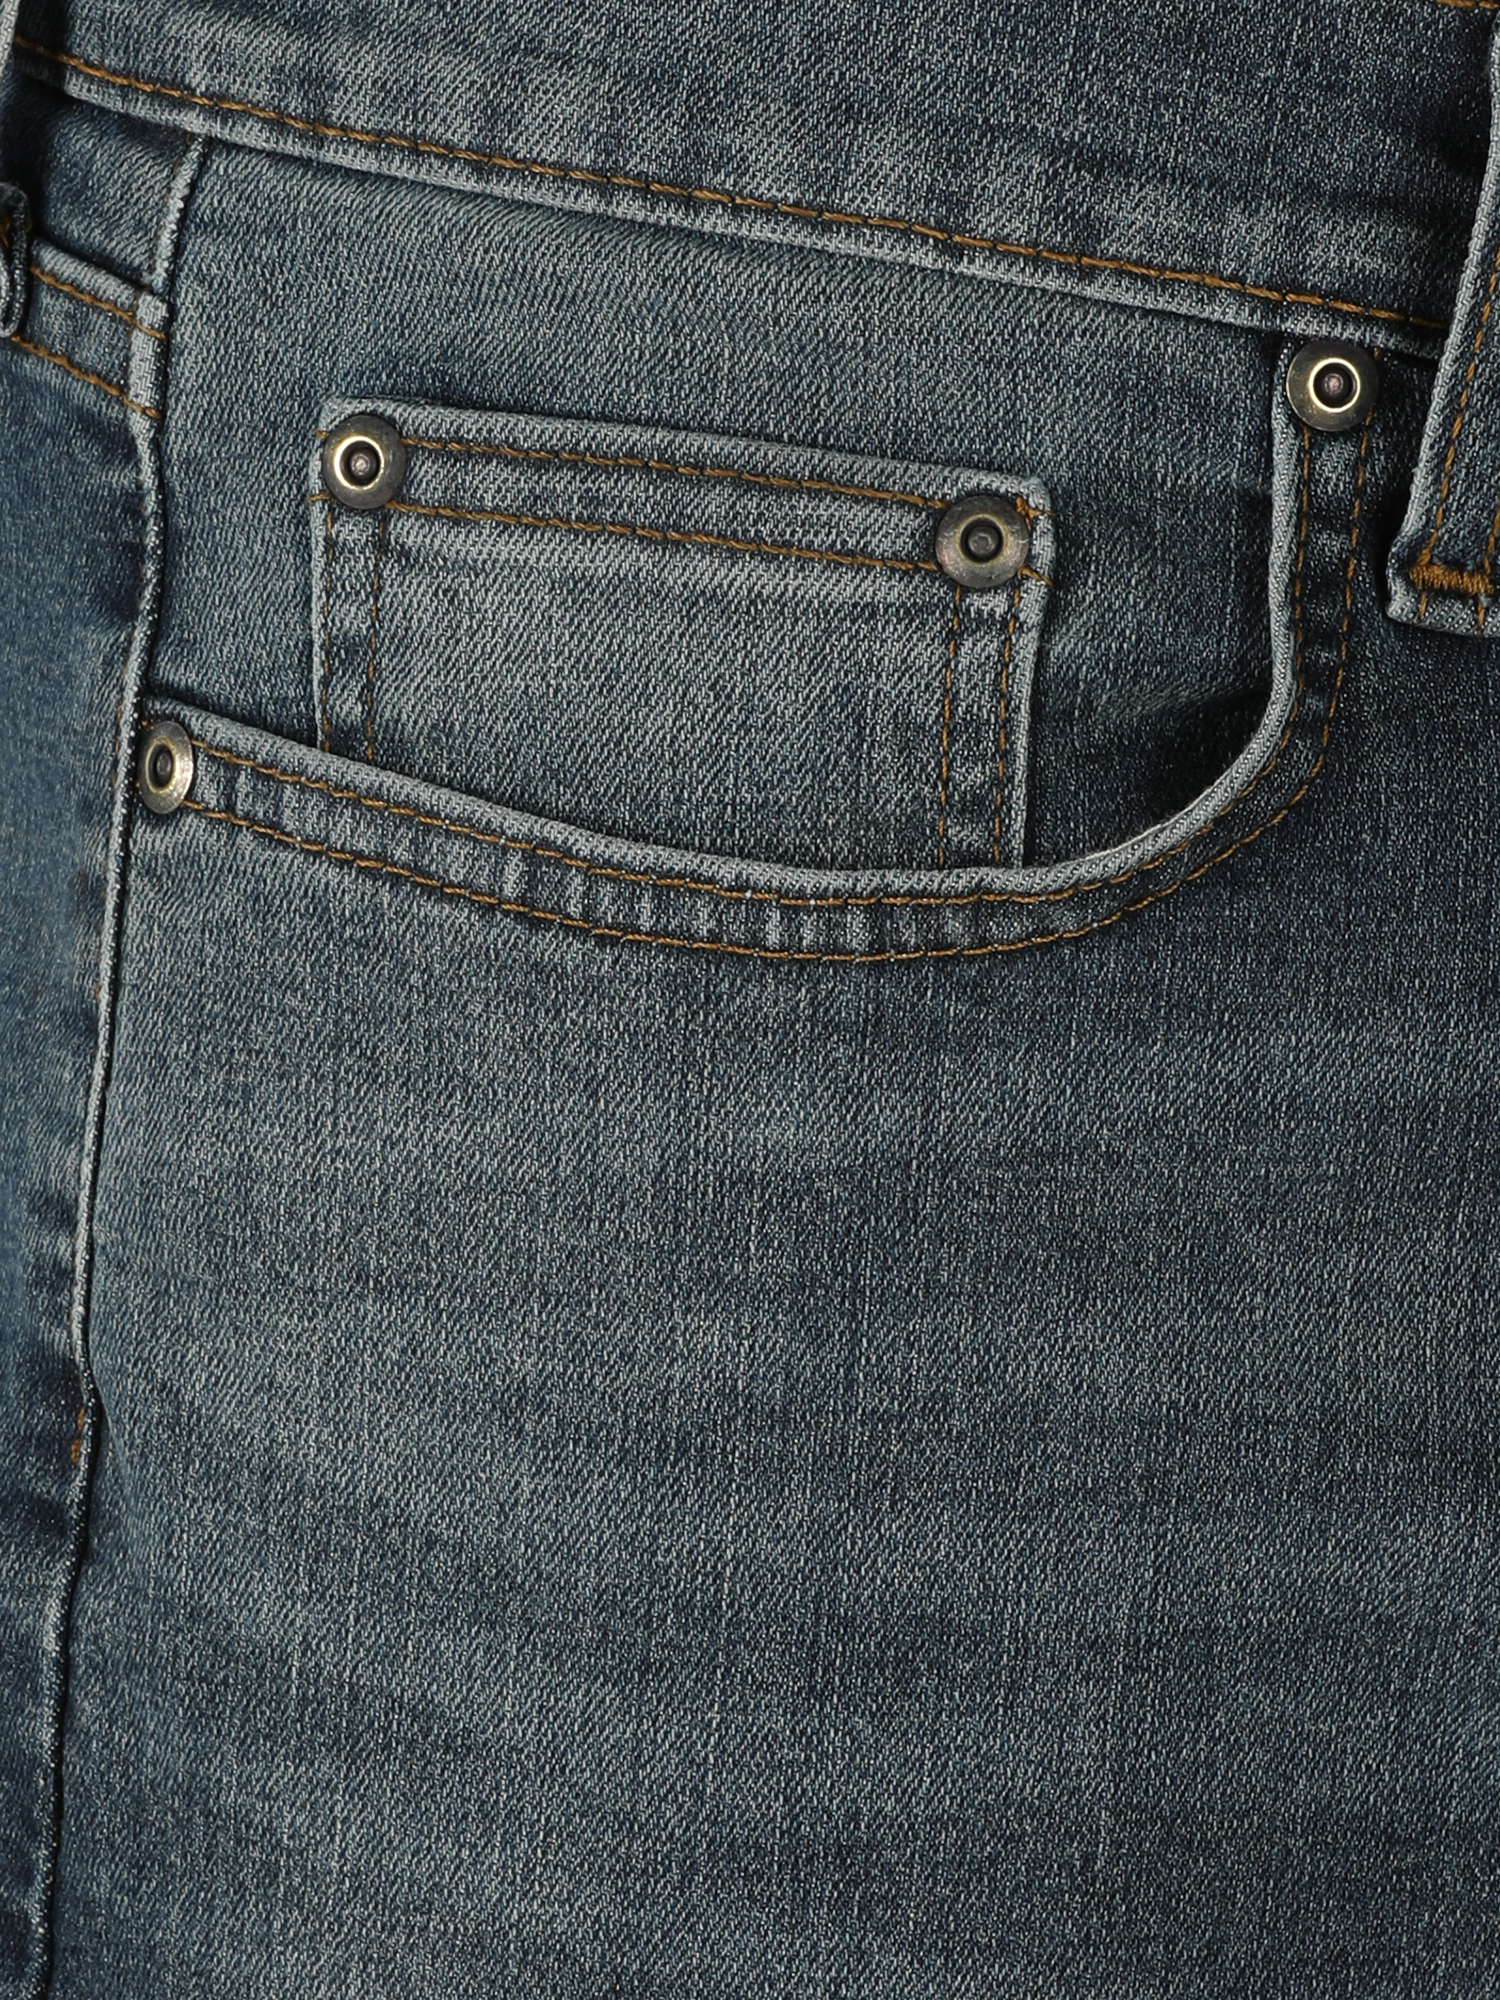 George Men's Bootcut Jeans - image 5 of 5